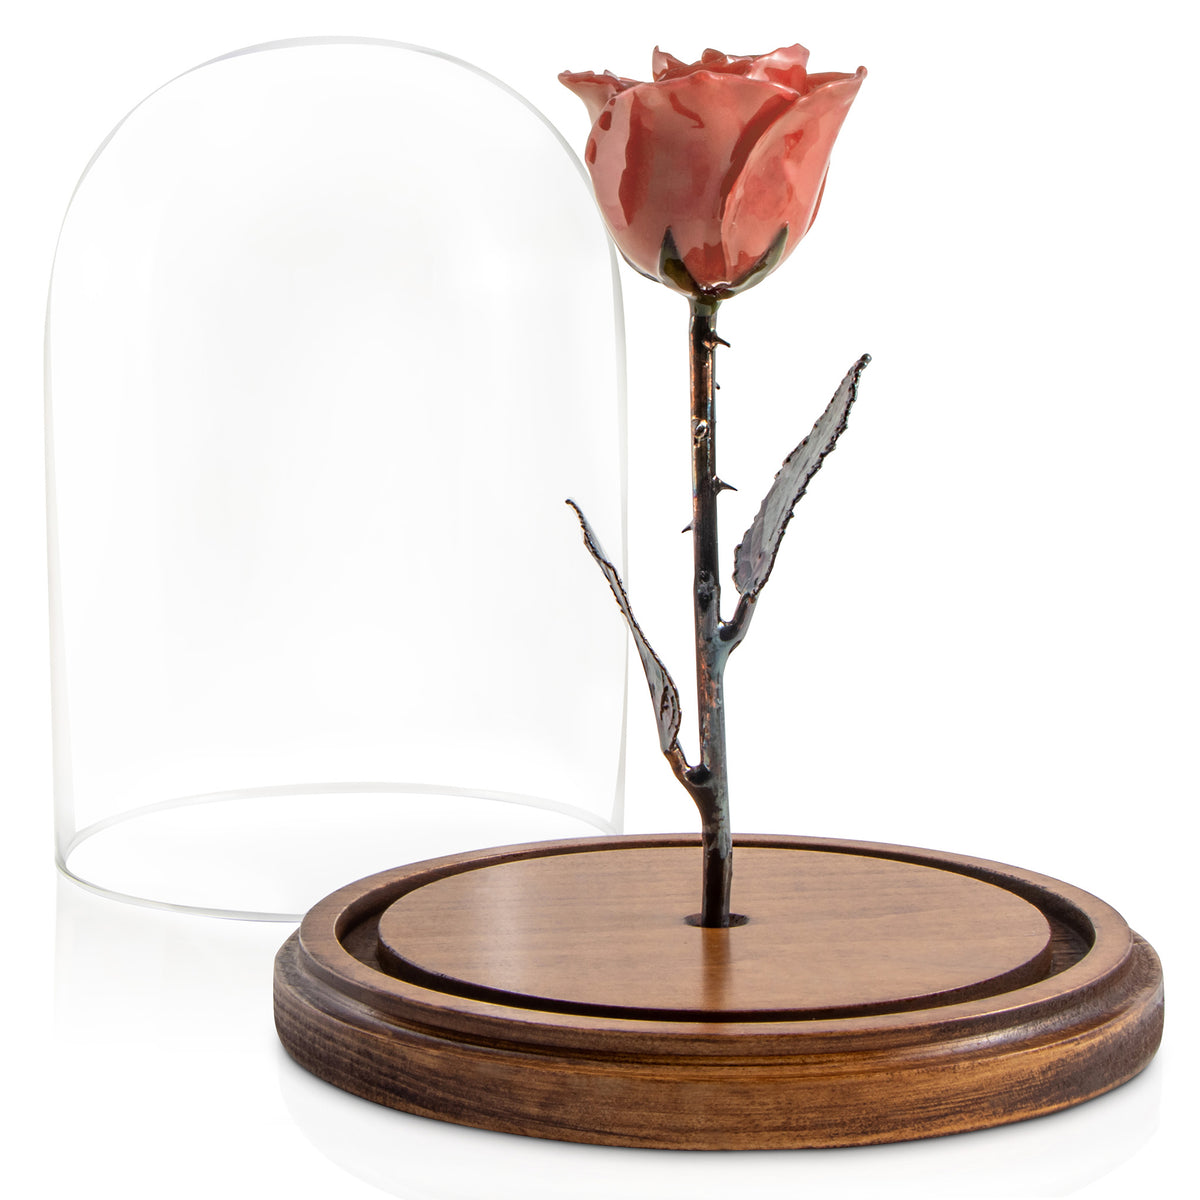 Pink Enchanted Rose (aka Beauty &amp; The Beast Rose) with Patina Copper Stem Mounted to A Hand Turned Solid Wood Base under a glass dome.